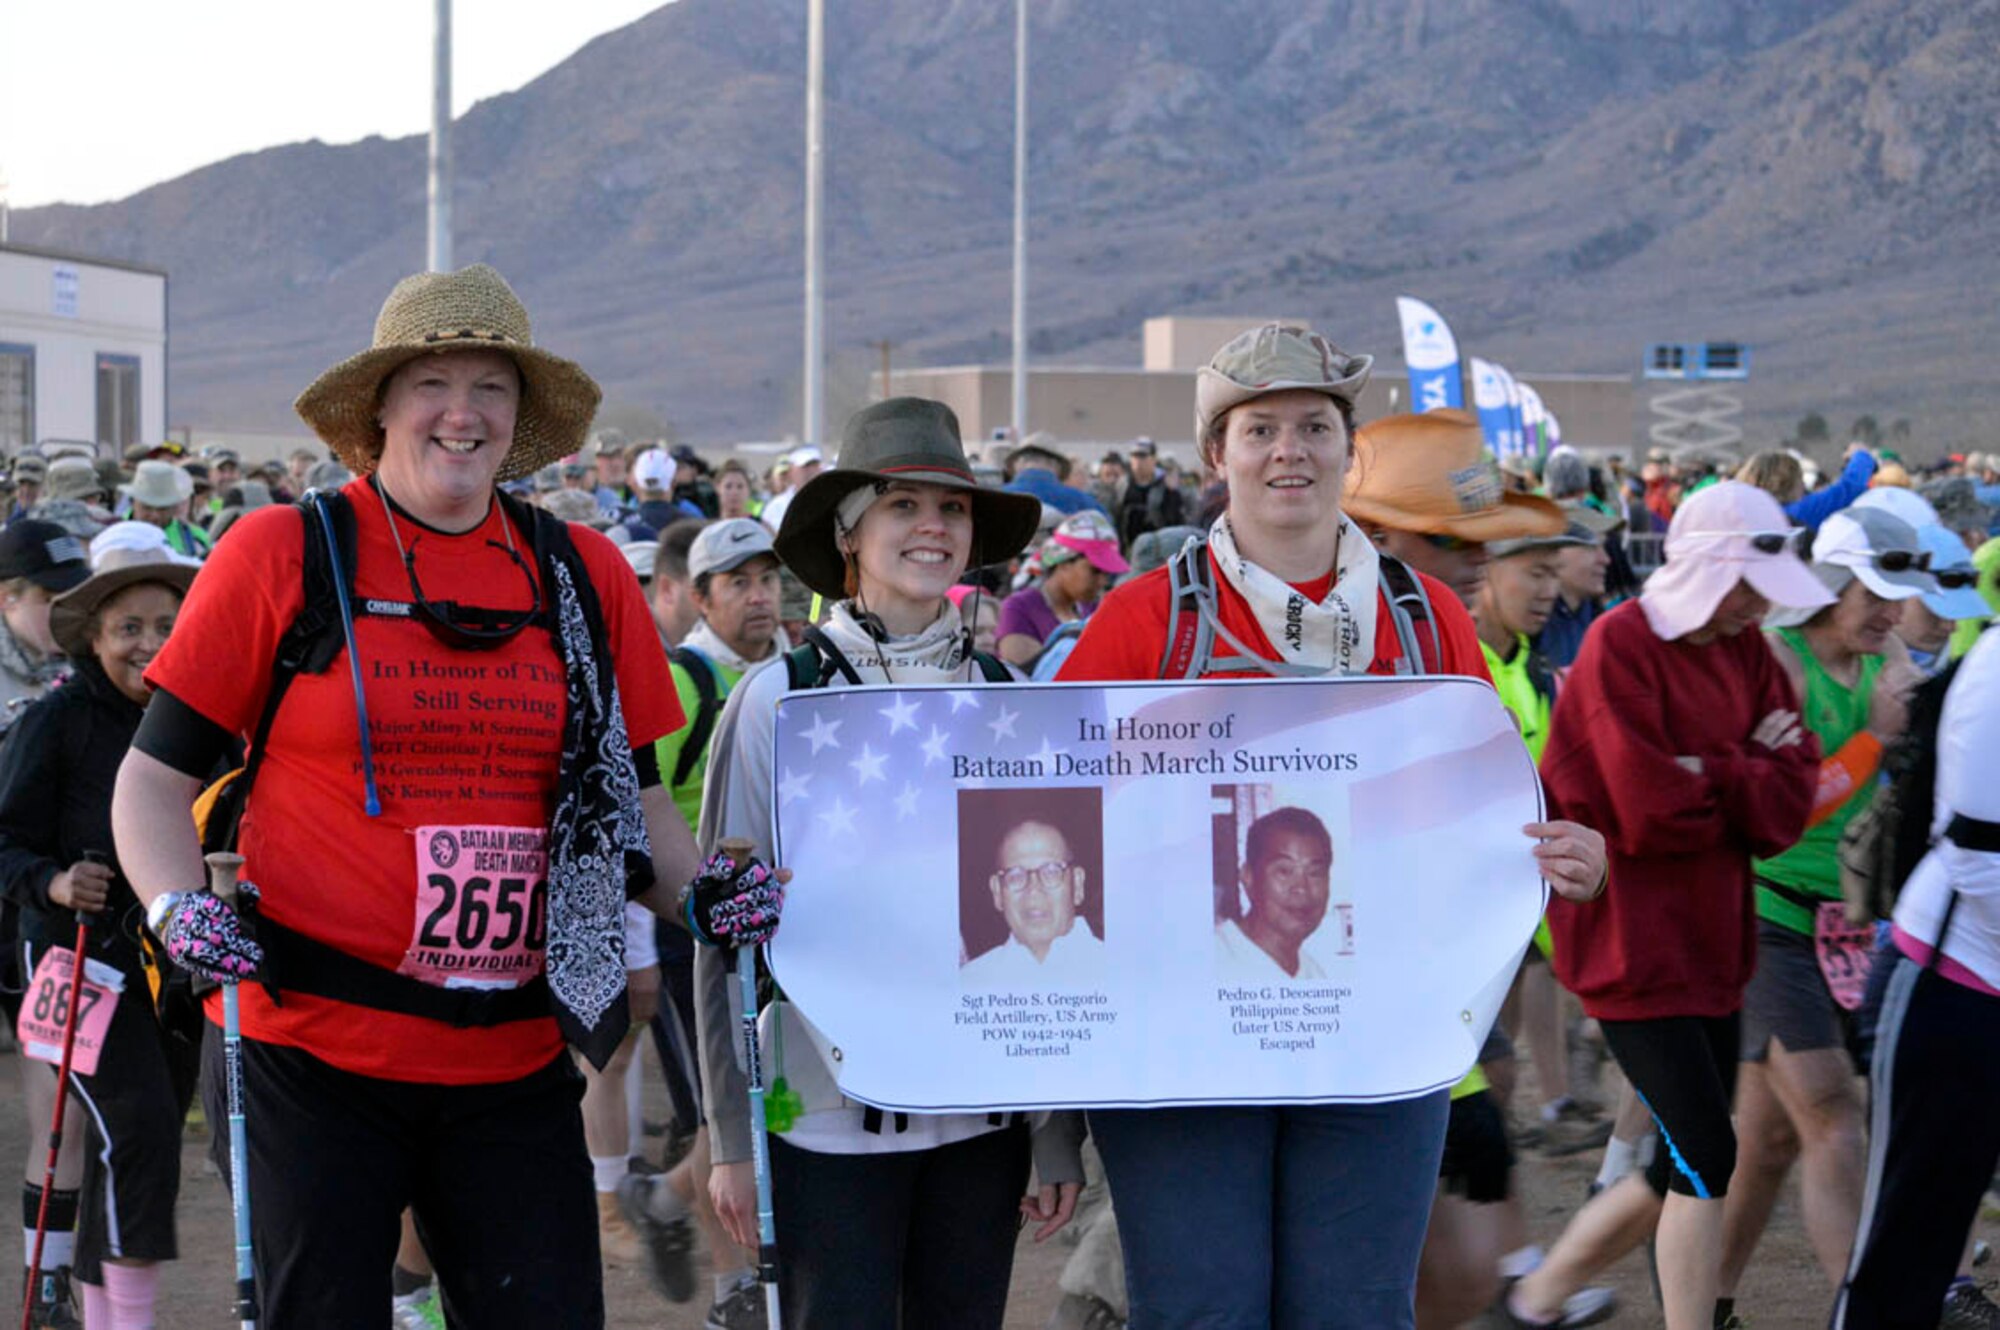 WHITE SANDS, N.M. -- (Far right) Maj. Misty Sorensen, 926th Group process manager, and family members participate in the Bataan Memorial Death March at the missile range Mar. 17. (U.S. Air Force photo/Richard Sorensen)

